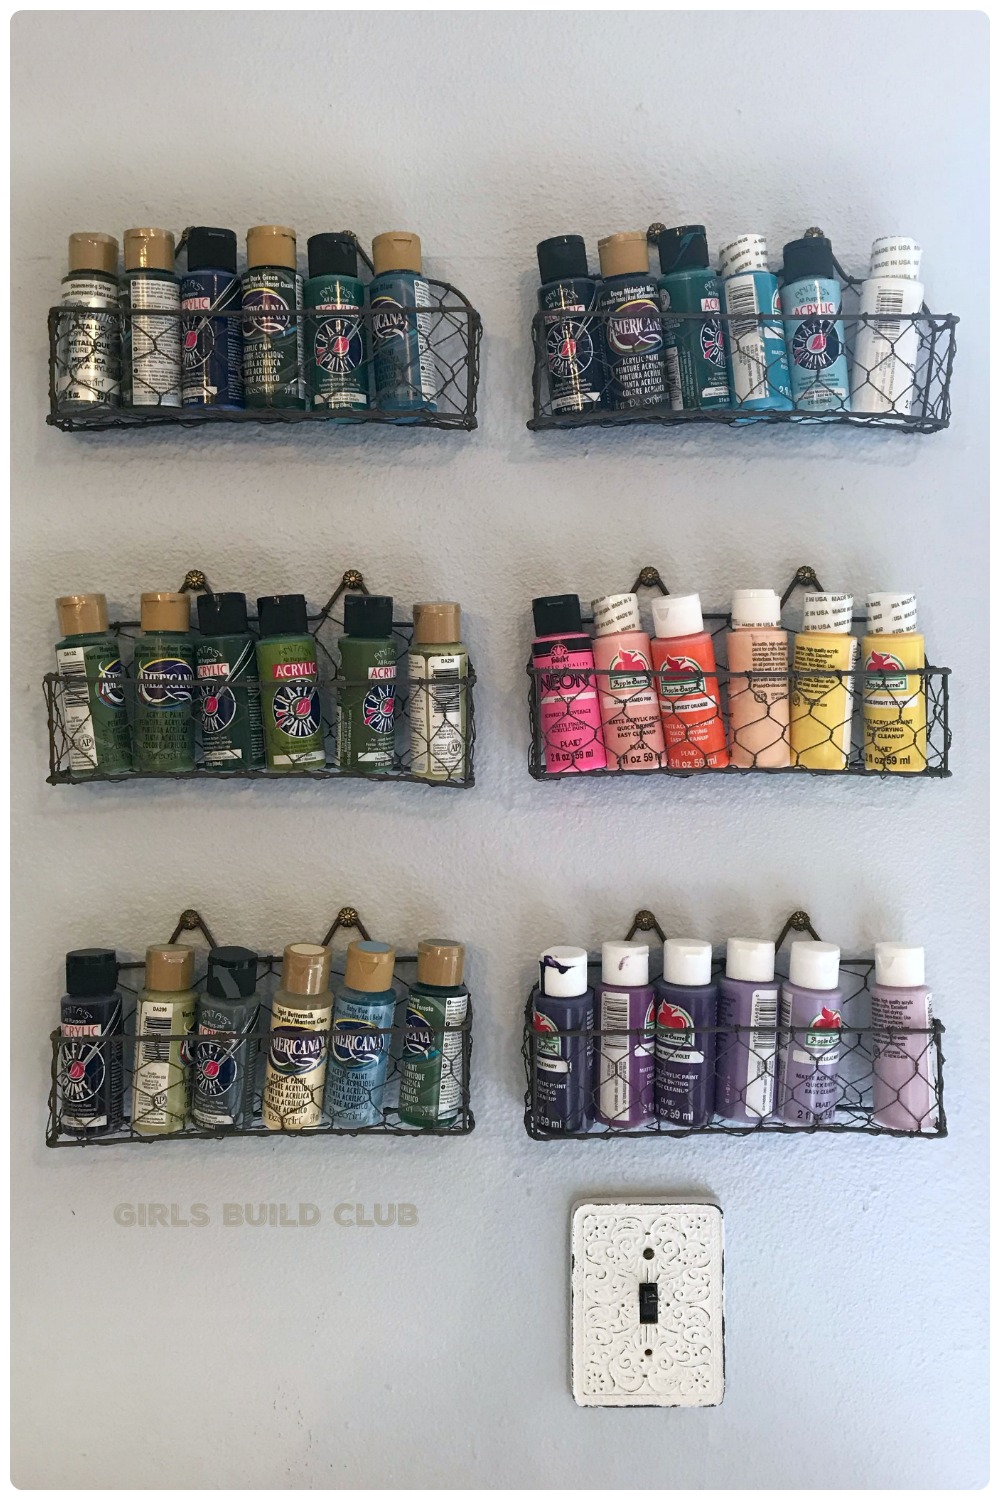 A little less clutter on the craft room counter after hanging these wire baskets on the wall!